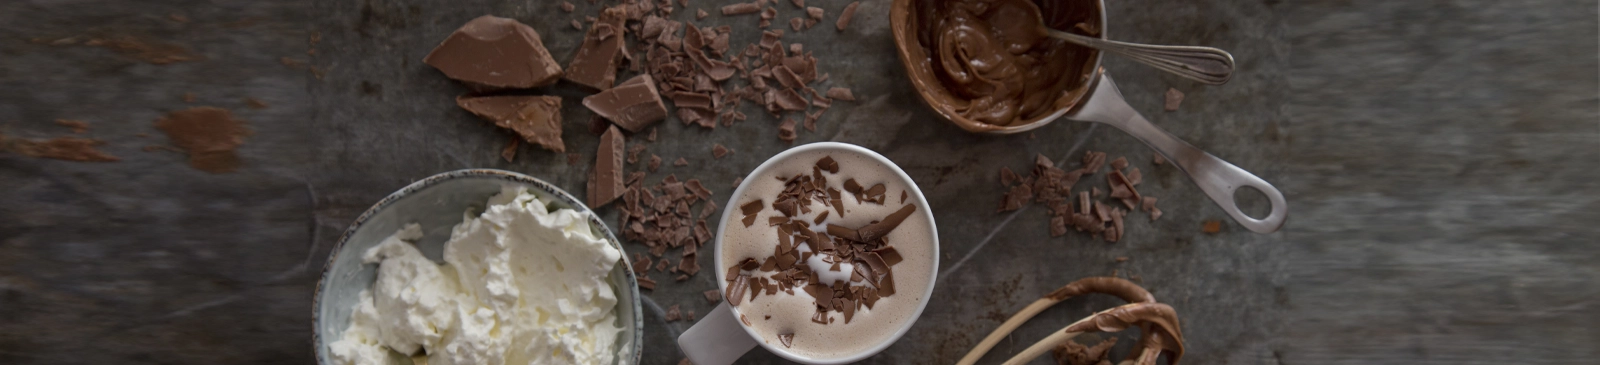 ARE YOU ONE OF IRELAND'S BIGGEST HOT CHOCOLATE FANS? BECOME AN INSOMNIA CHOCOLATIER!